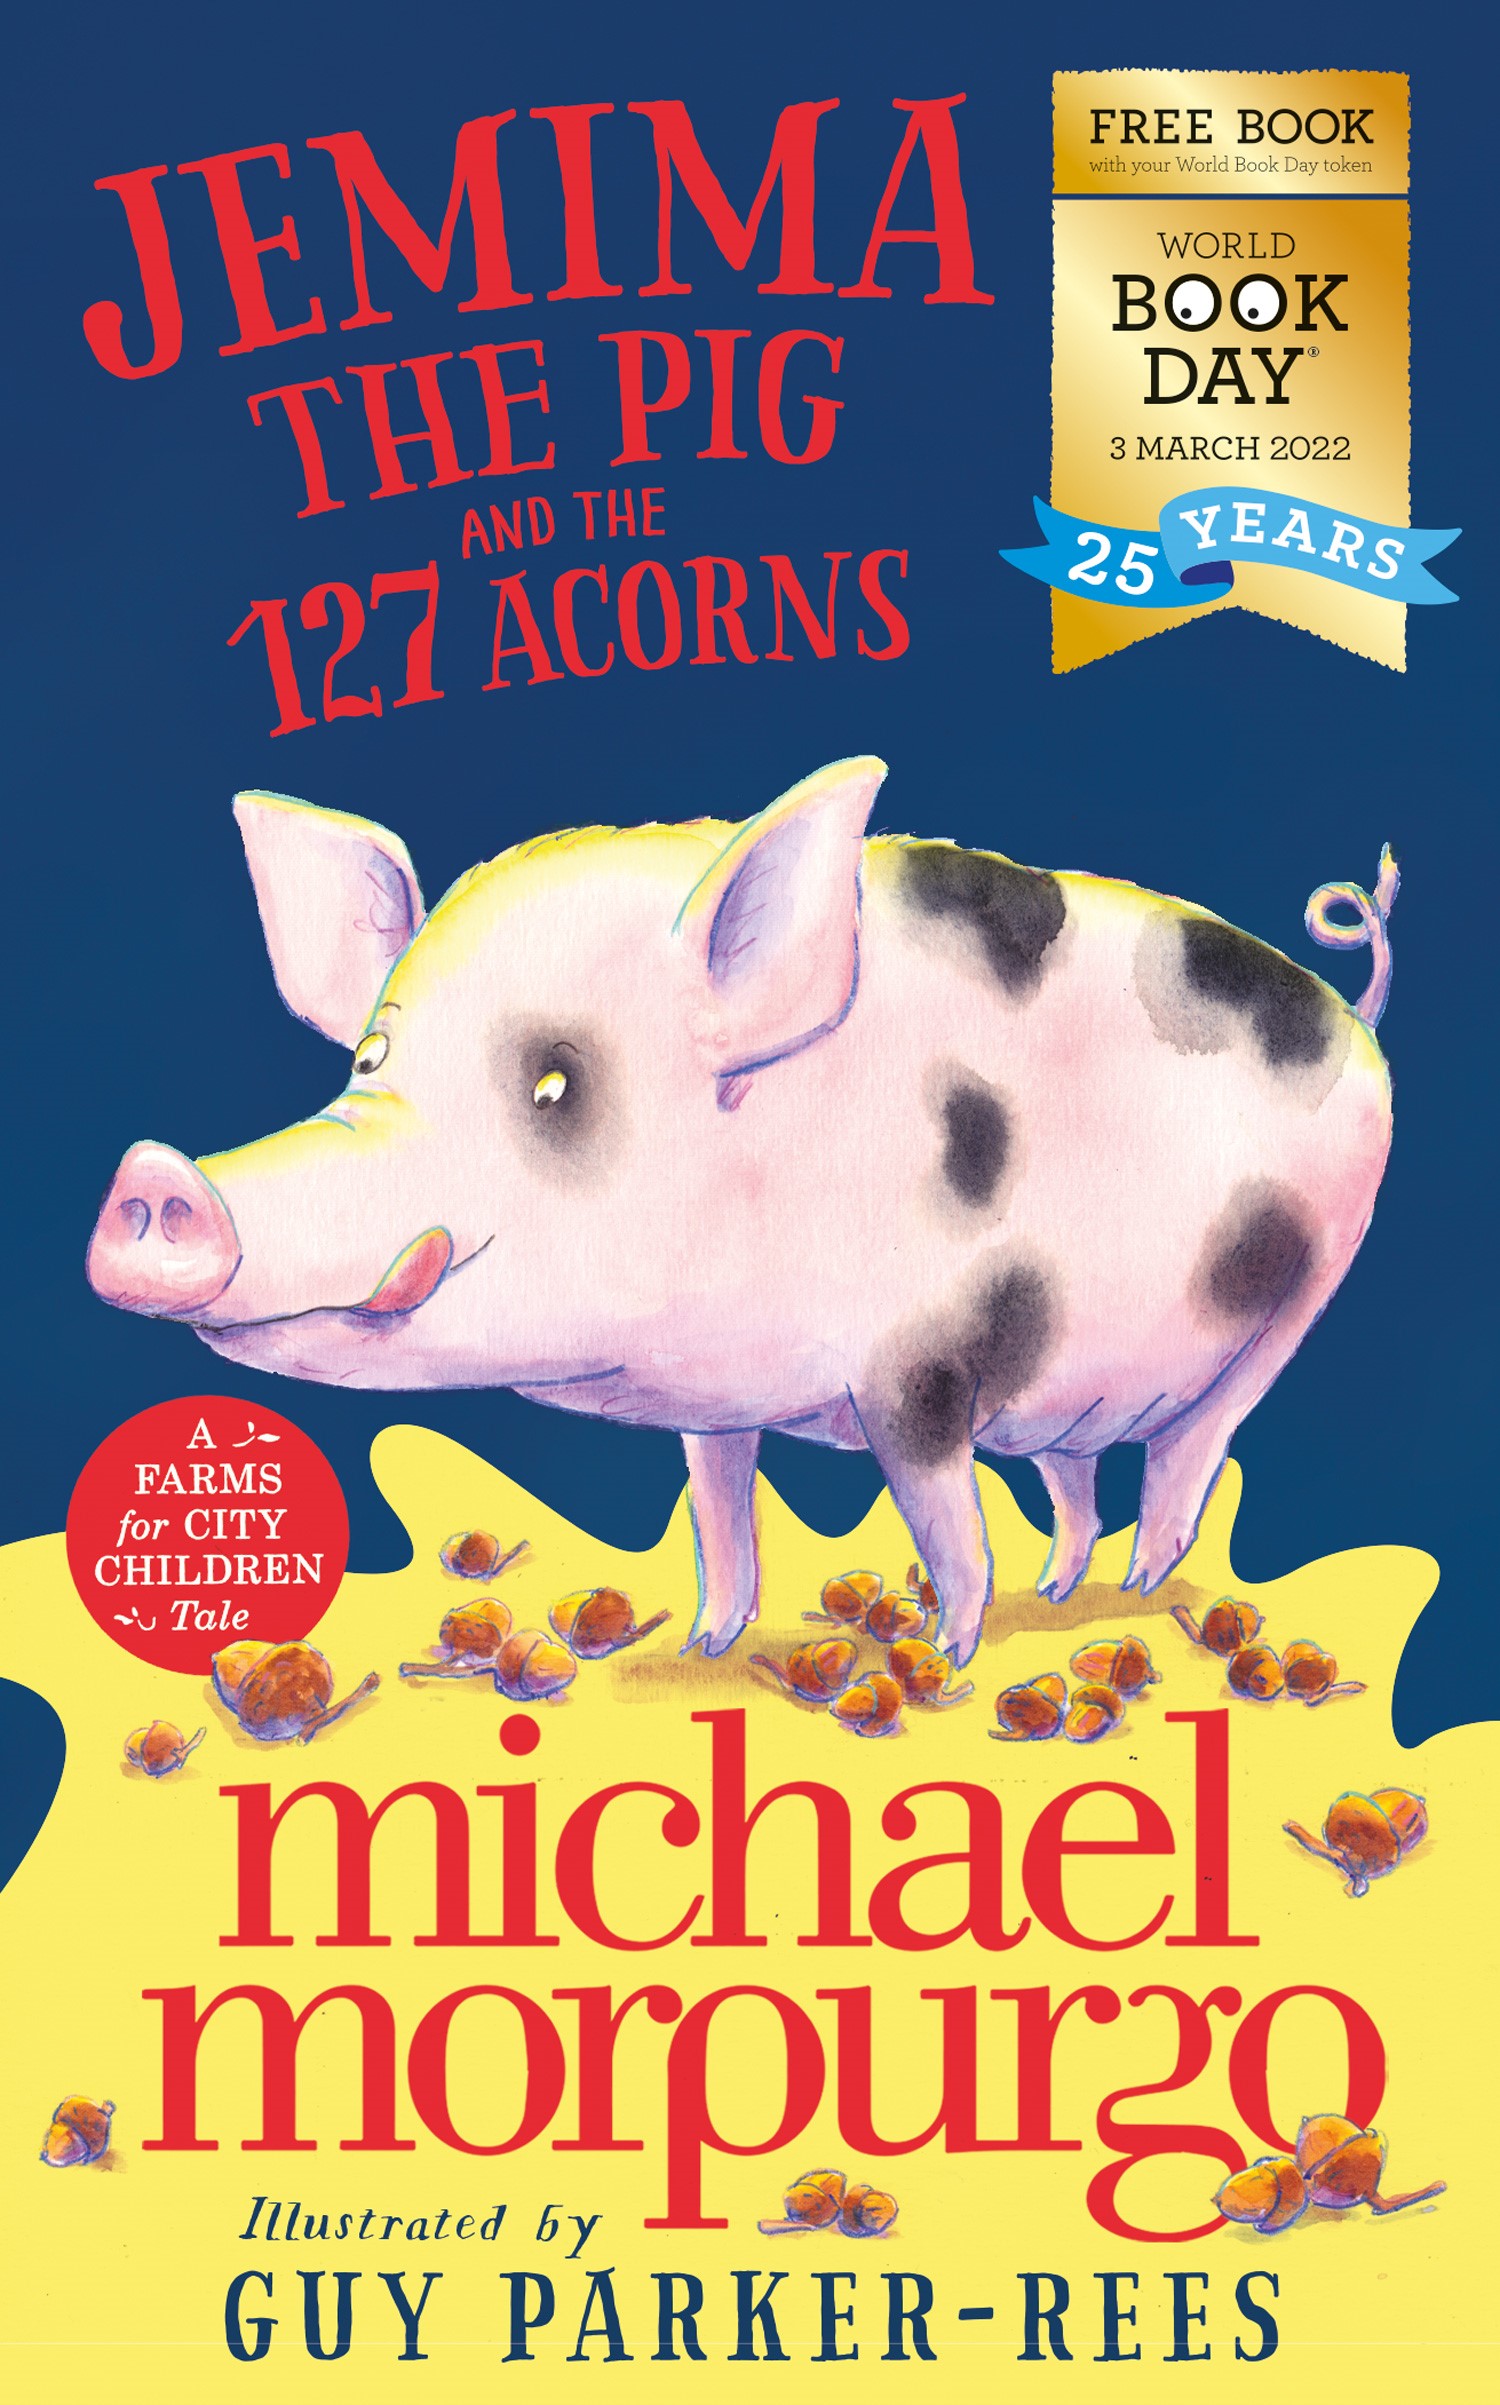 Jemima the Pig and the 127 Acorns - A Farms for City Children Tale